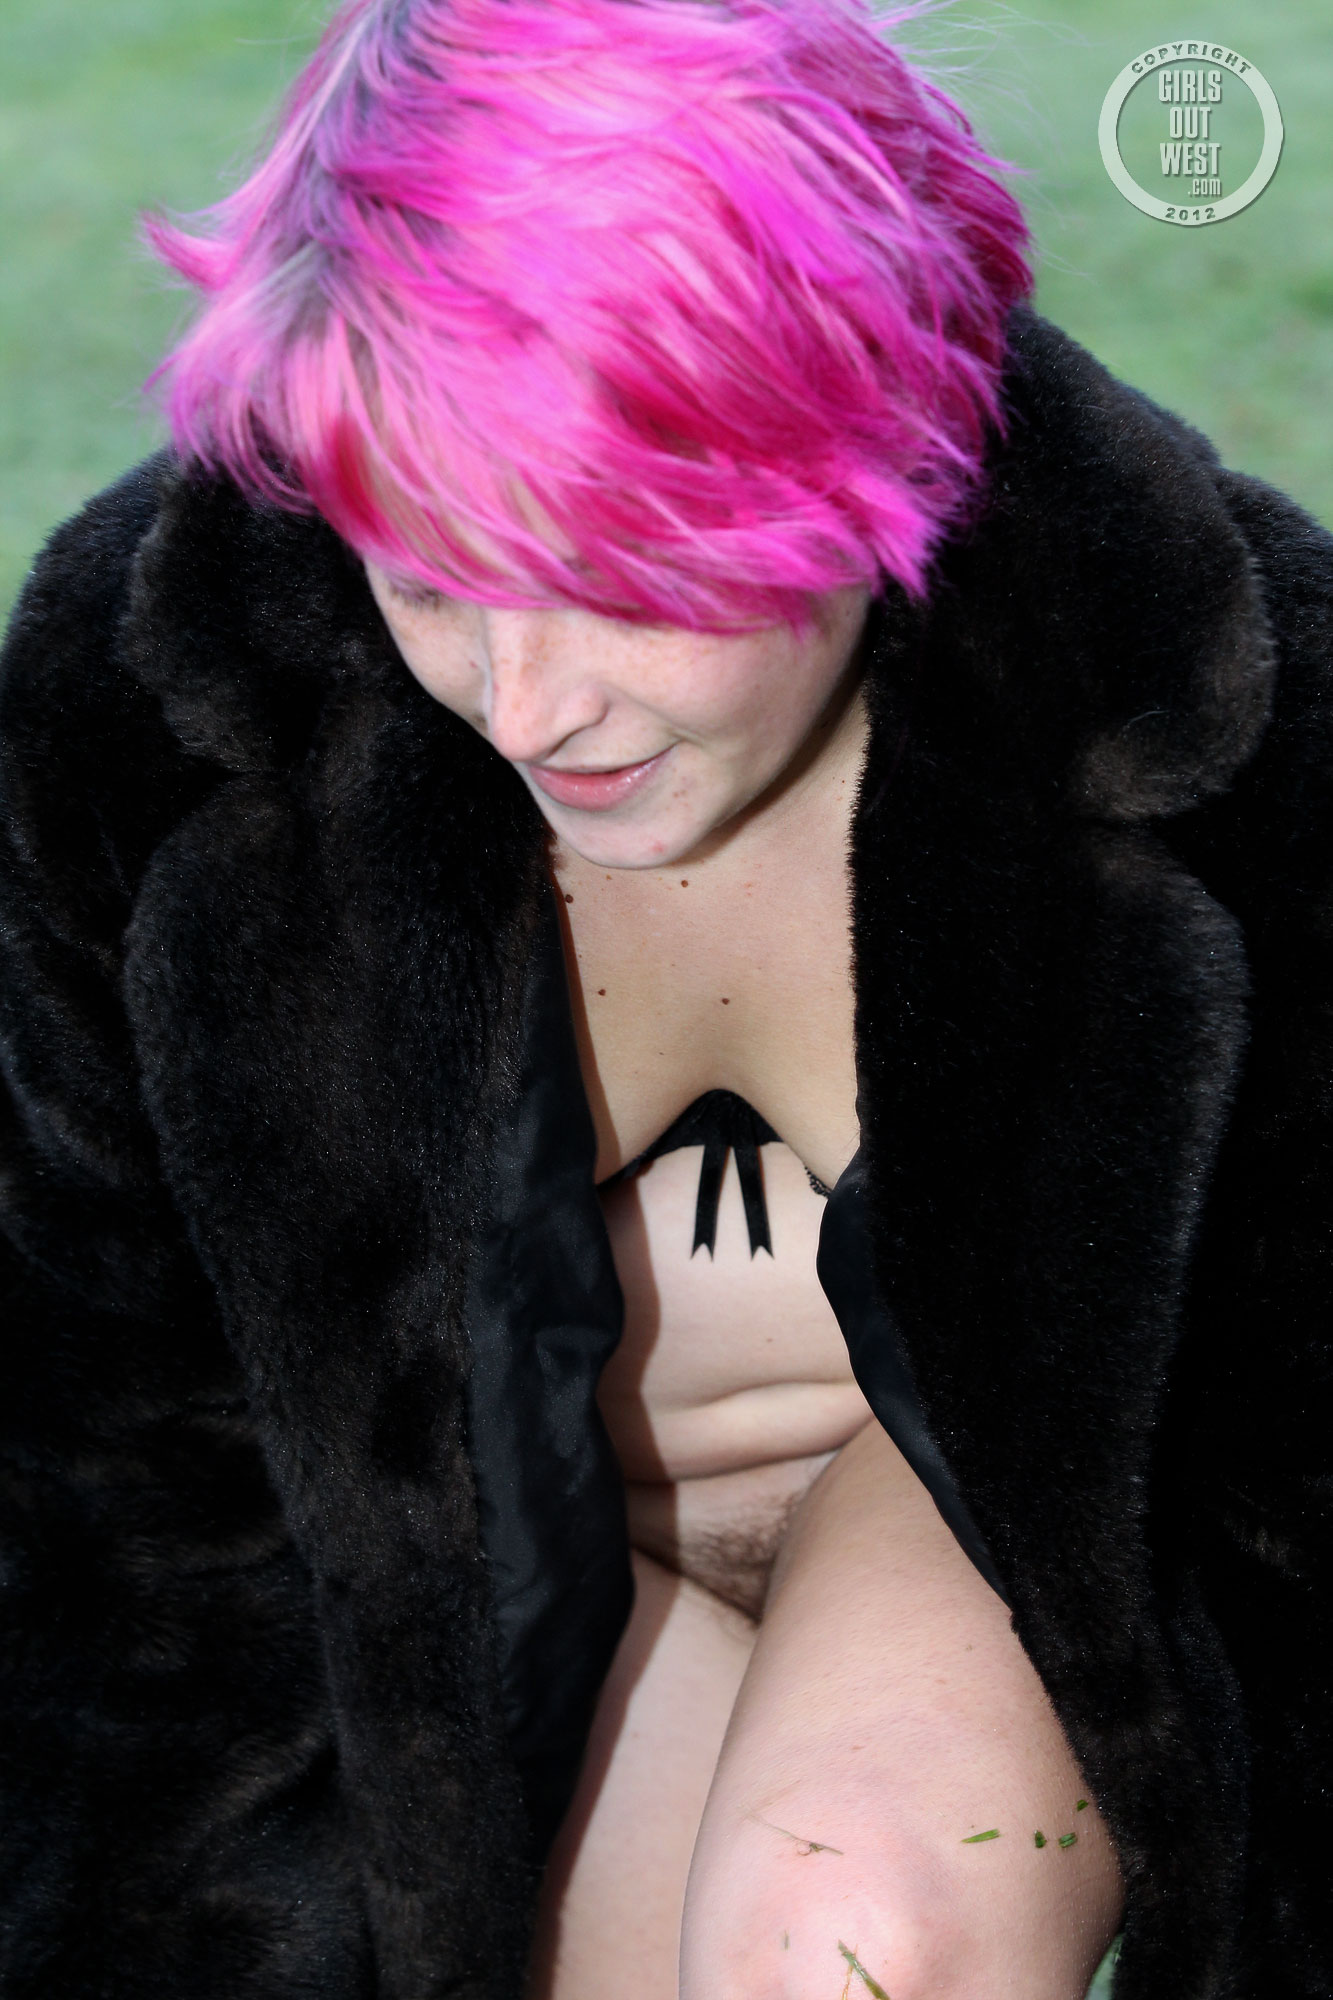 wpid-pink-haired-amateur-franky-flashing-her-pussy-outside-in-her-boots-and-coat12.jpg